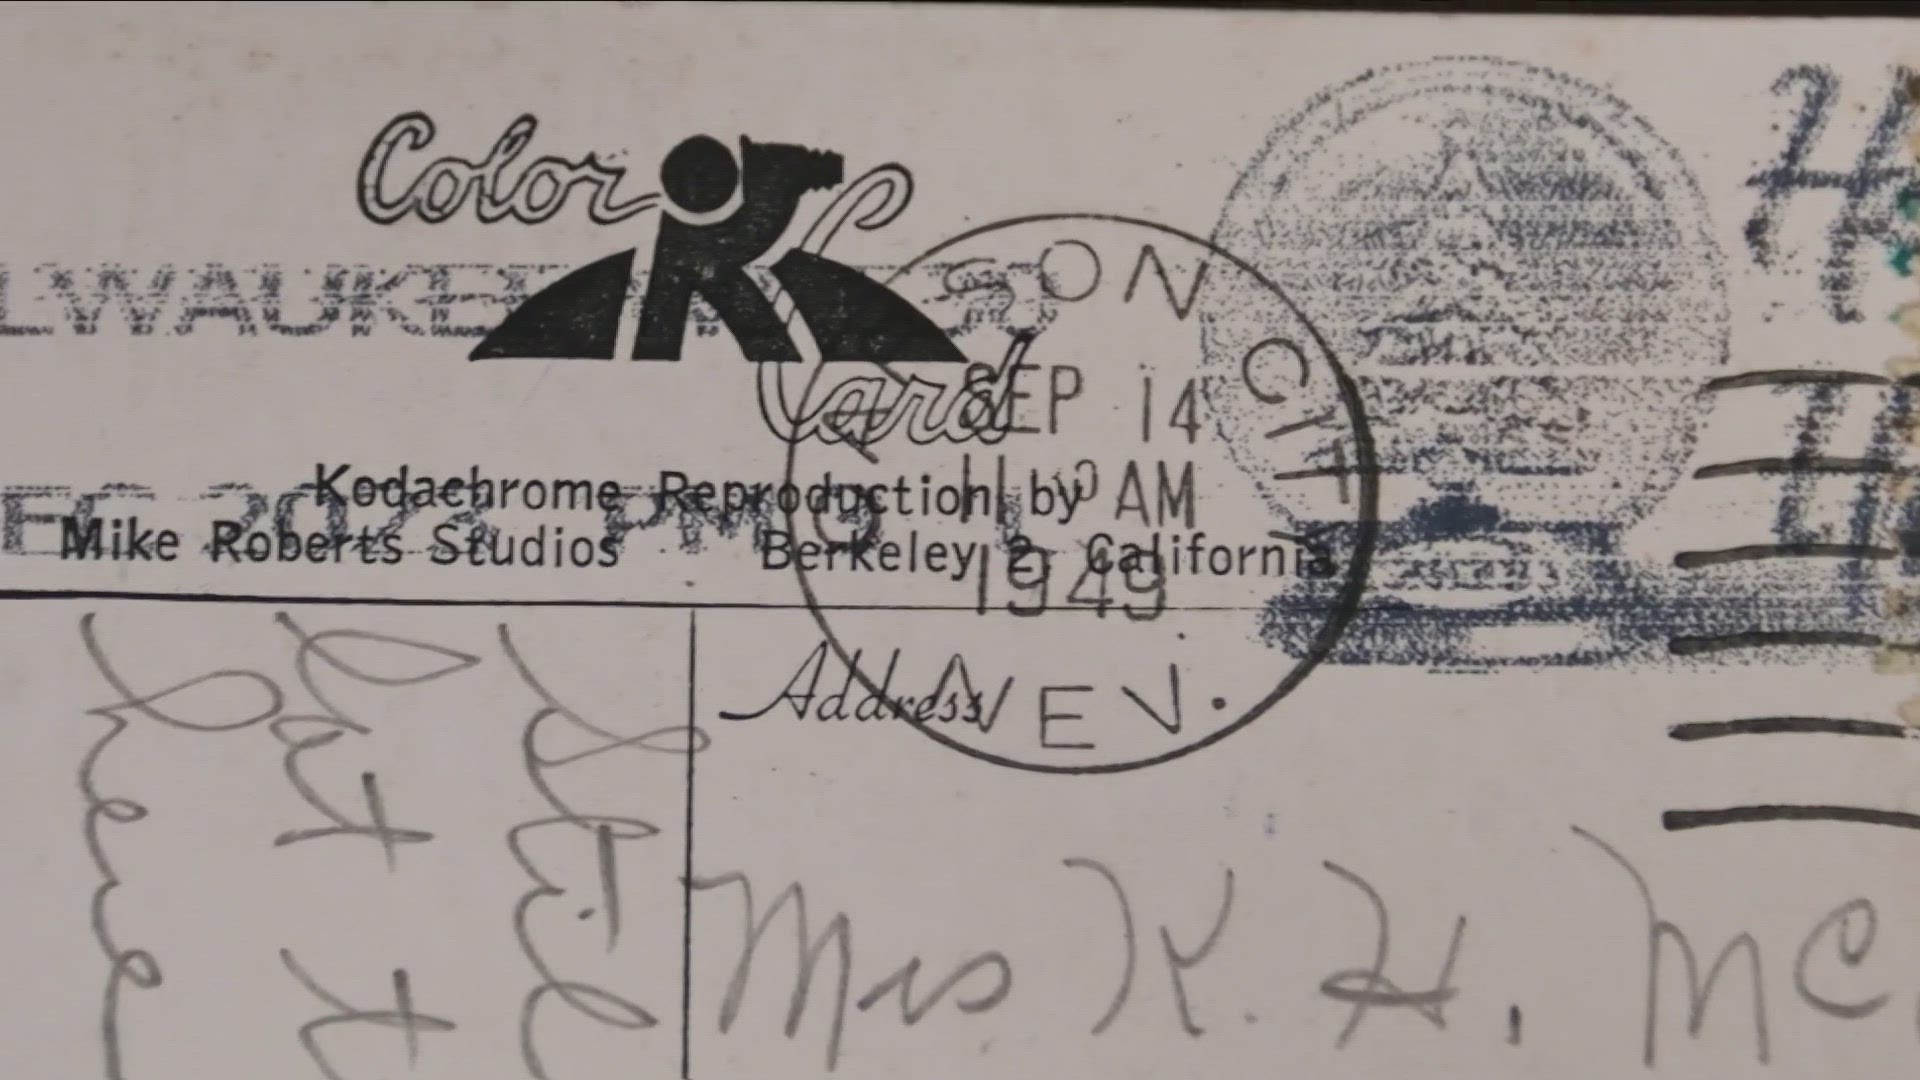 There's one postmark indicating the card was mailed from Carson city, in September of 1949.